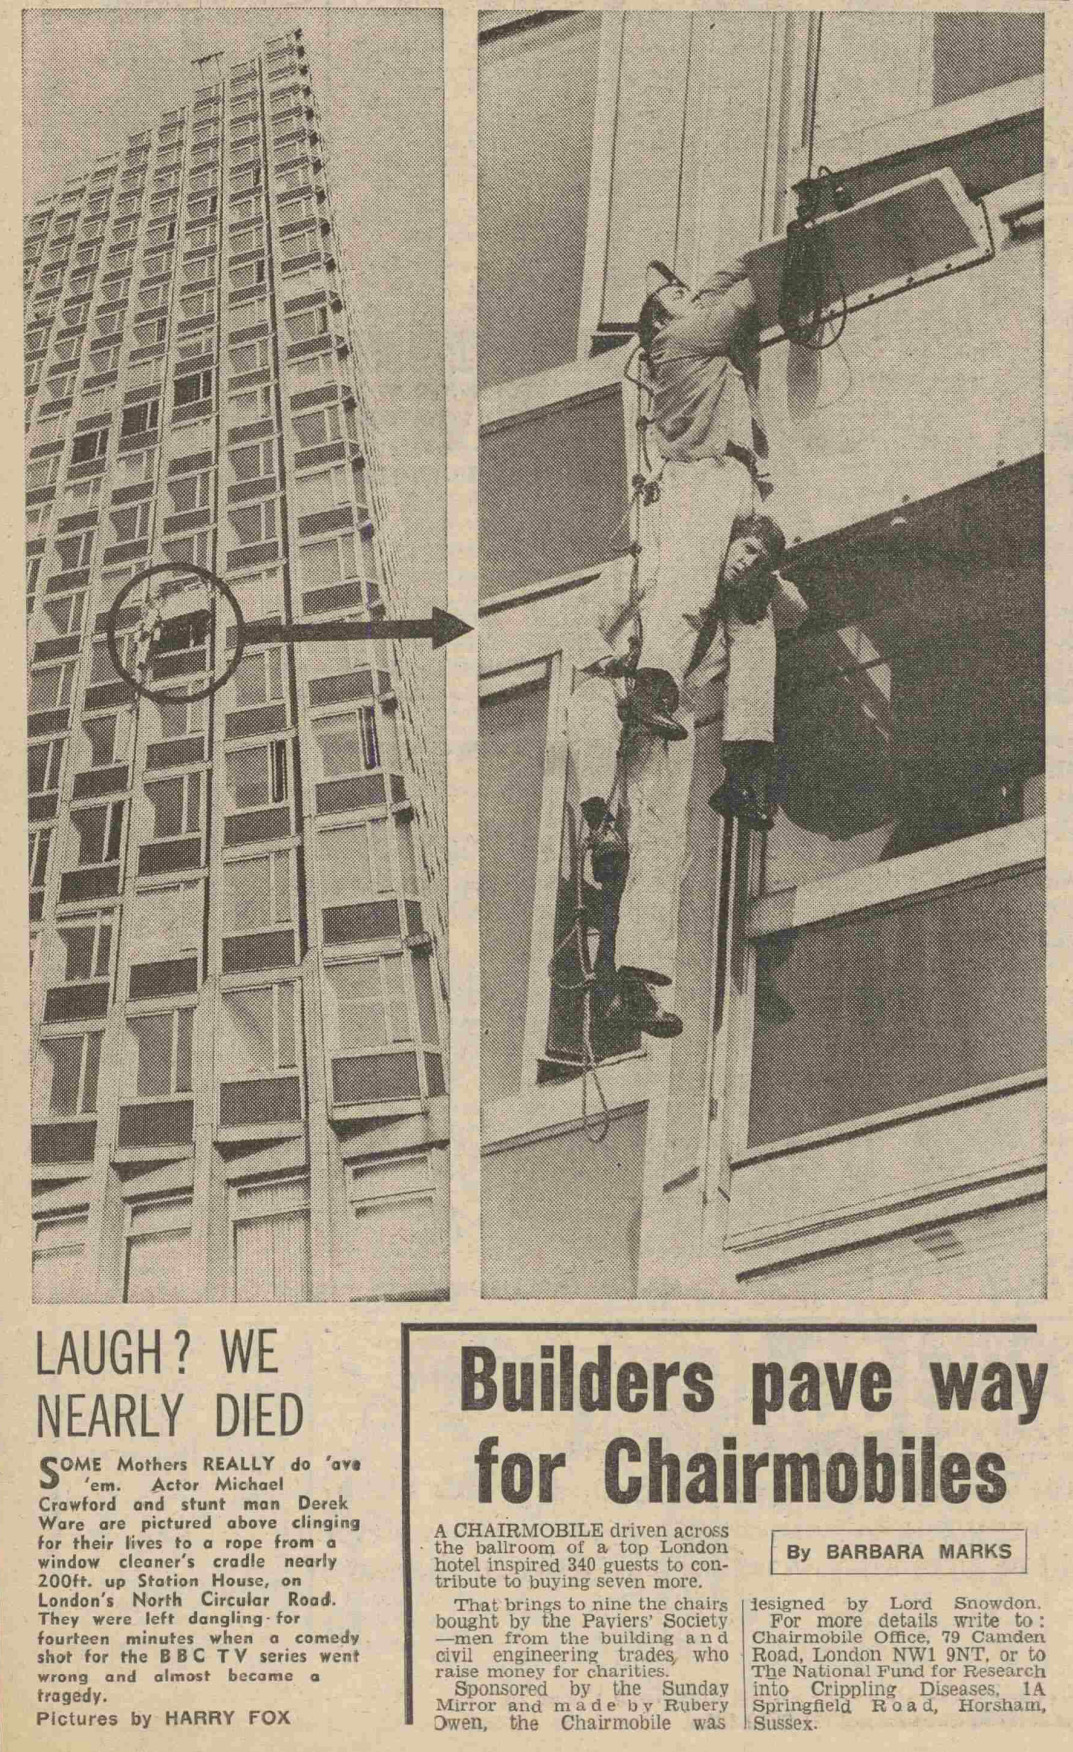 Two pictures of Michael Crawford hanging off a building. Report text as follows:

Laugh? We nearly died
Some Mothers REALLY do 'ave 'em. Actor Michael Crawford and stunt man Derek Ware are pictured above clinging for their lives to a rope from a window cleaner's cradle nearly 200ft up Station House, on London's North Circular Road. They were left dangling for fourteen minutes when a comedy show the the BBC TV series went wrong and almost became a tragedy.